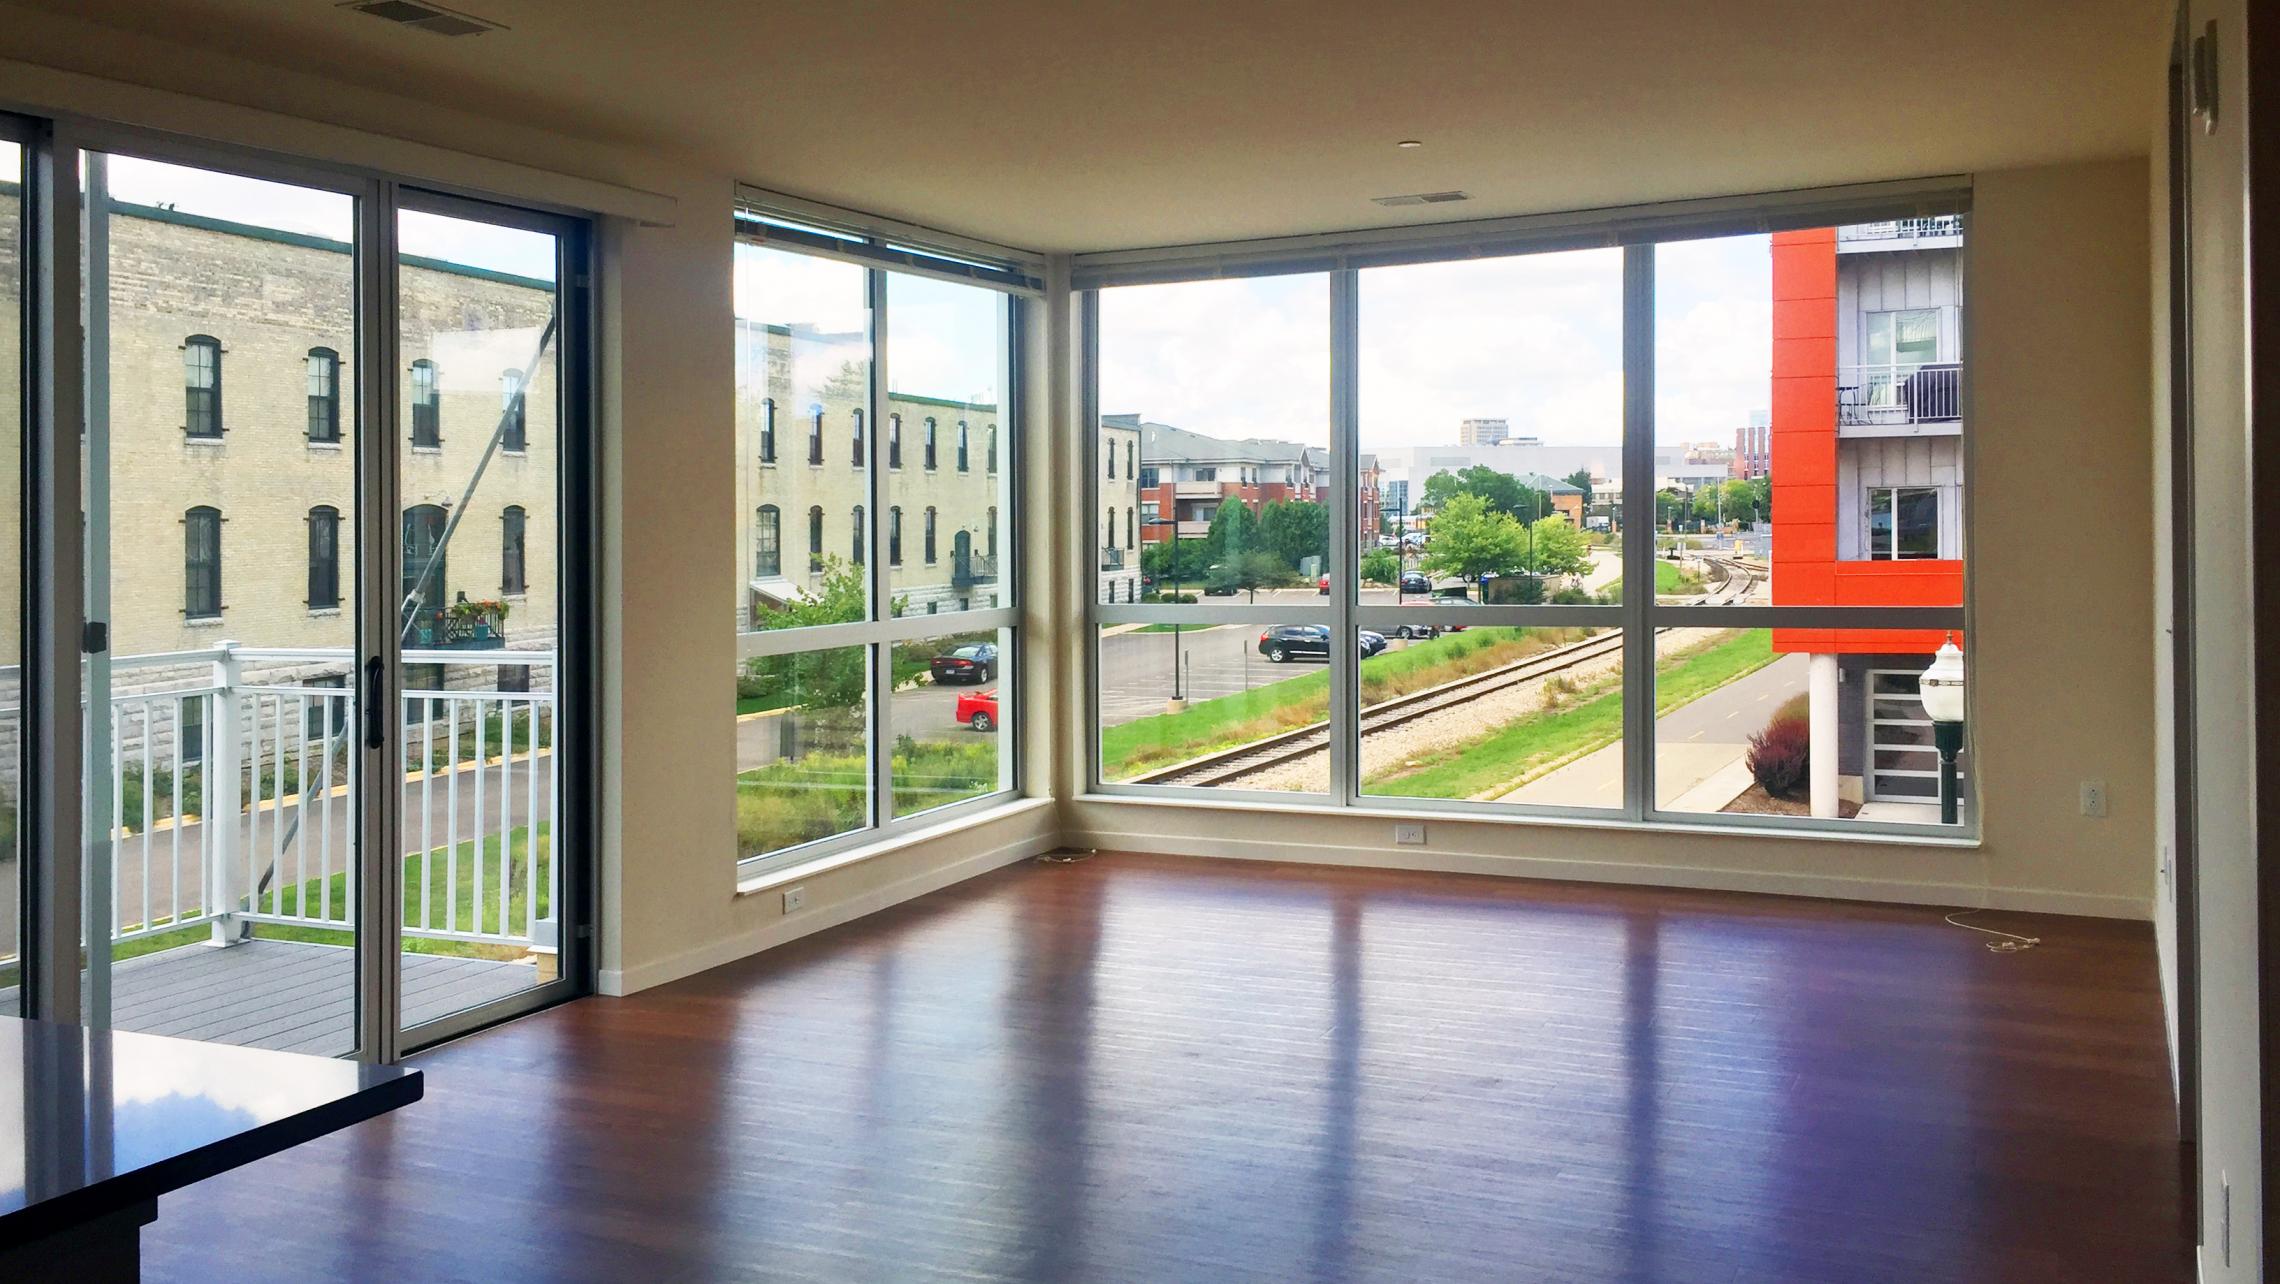 Nine-Line-at-The-Yards-Two-Bedroom-Apartment-214-Corner-Windows-Views-Stunning-Downtown-Madison-Bike-Path-Capitol-Lake-Modern-Upscale-Fitness-Gym-Dogs-Cats-Balcony-Patio